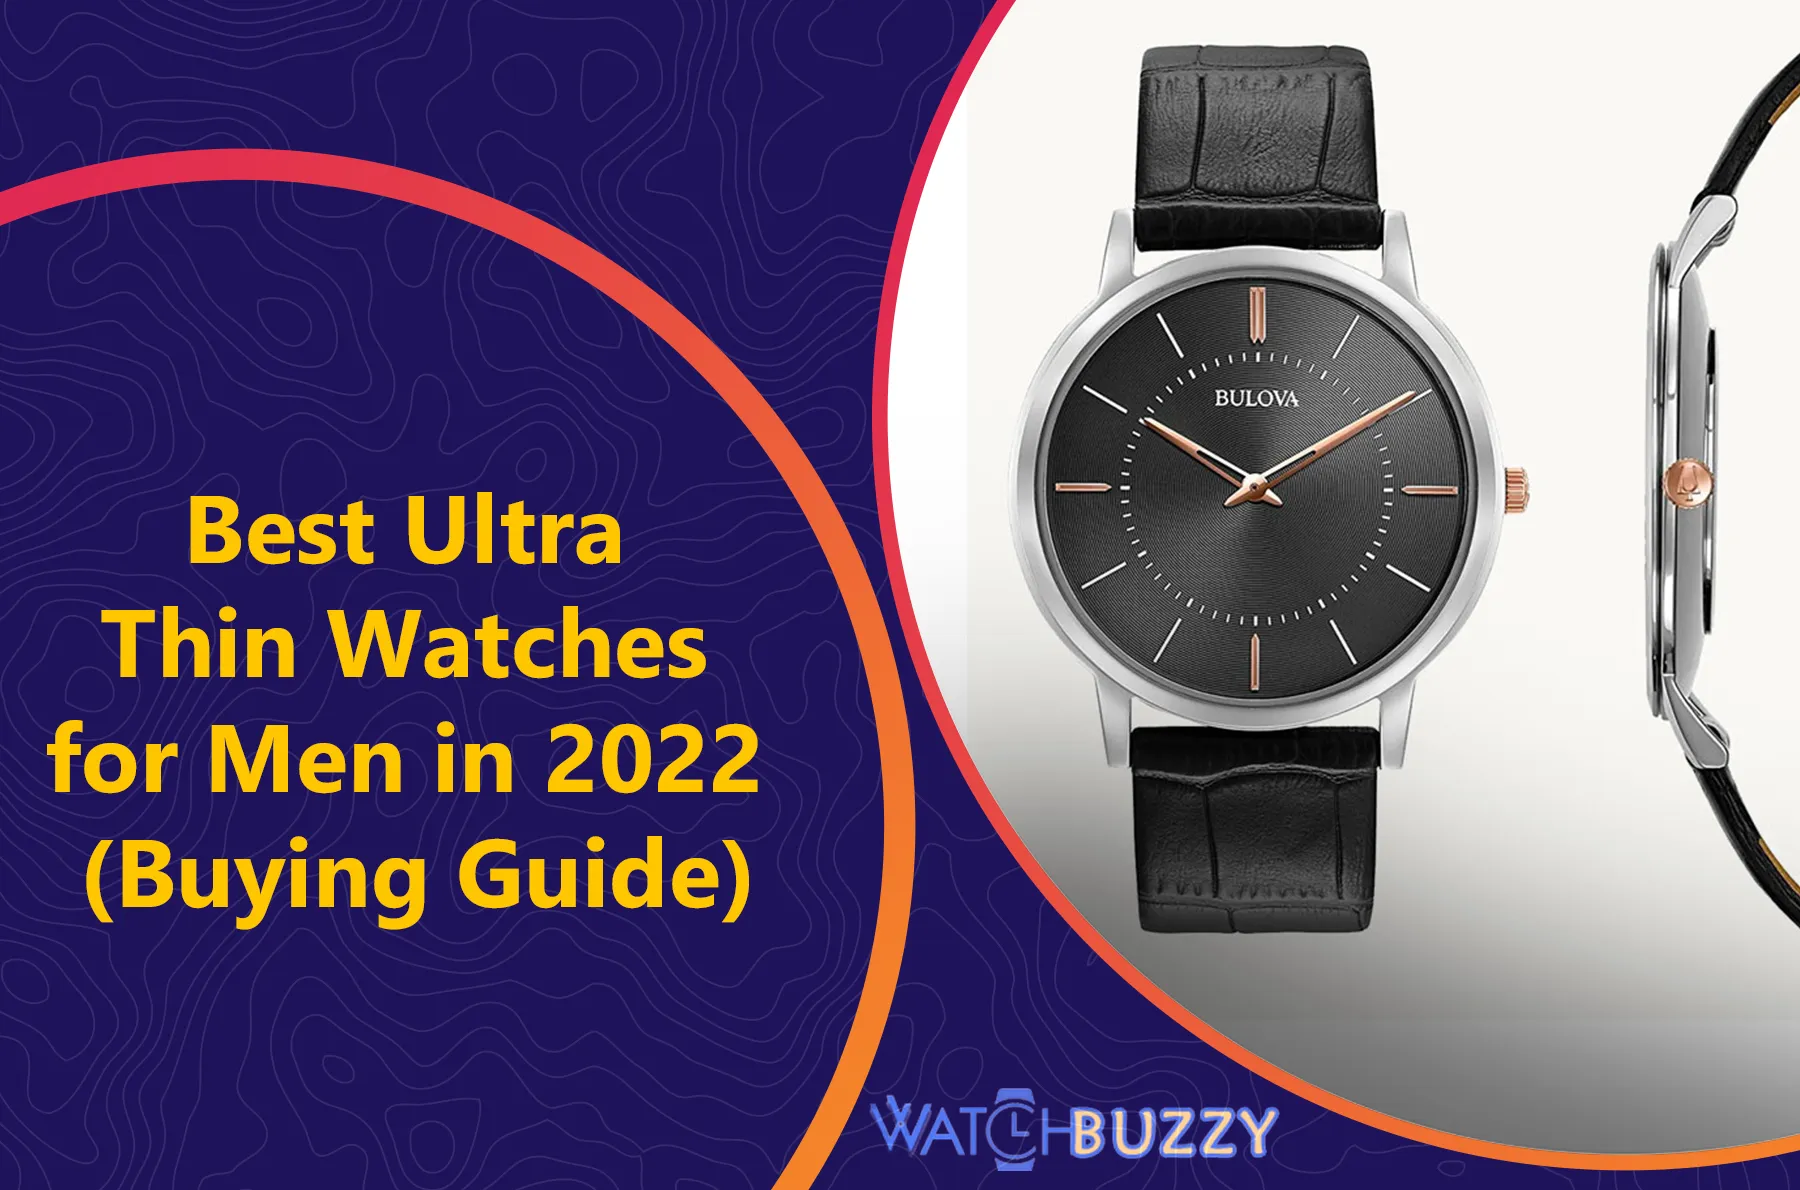 Best Ultra Thin Watches for Men in 2022 (Buying Guide)